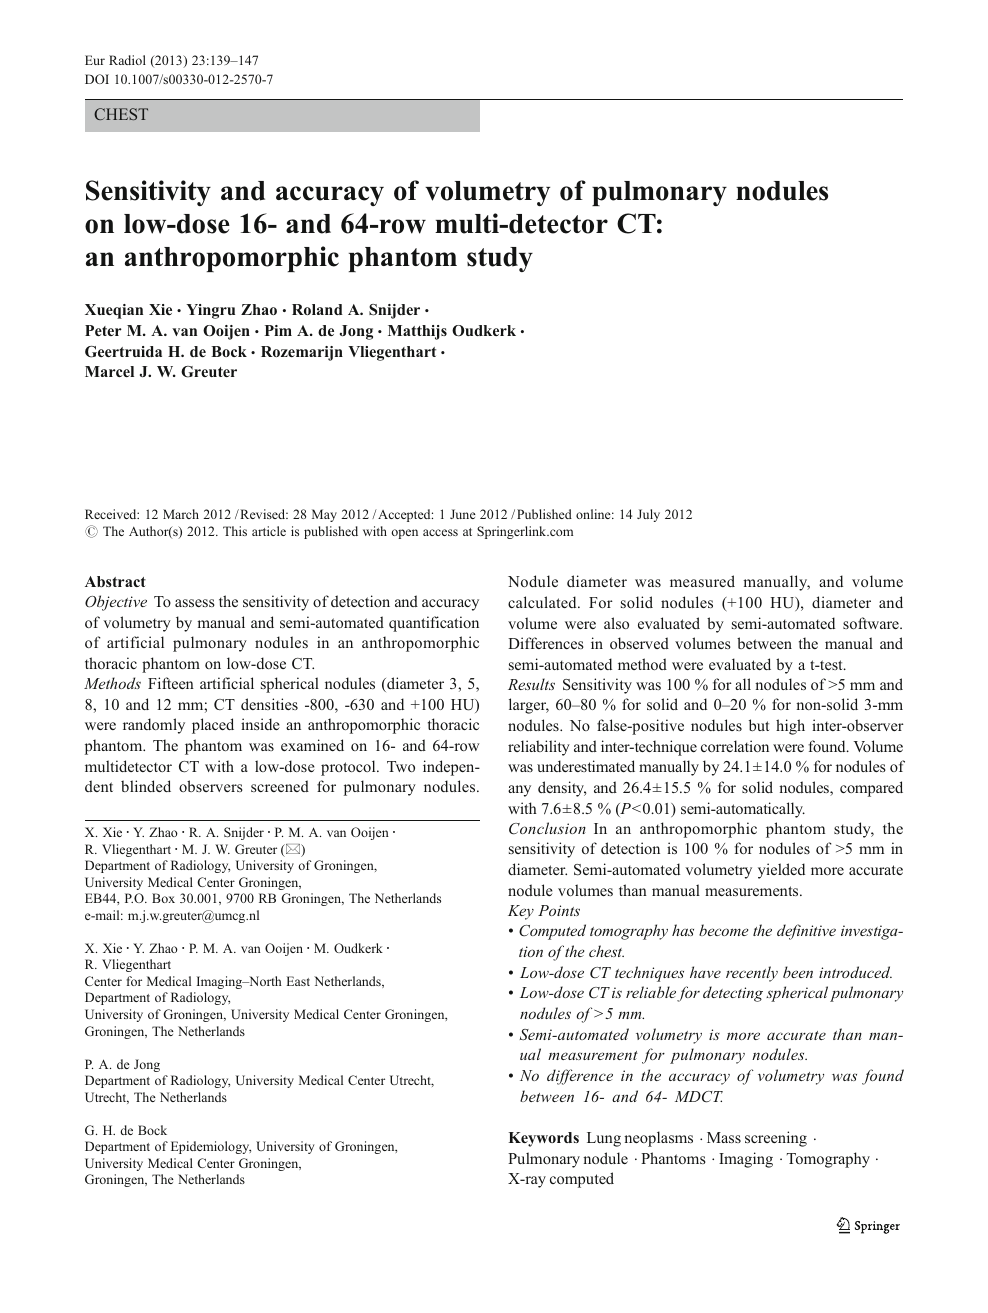 Sensitivity And Accuracy Of Volumetry Of Pulmonary Nodules On Low Dose 16 And 64 Row Multi Detector Ct An Anthropomorphic Phantom Study Topic Of Research Paper In Medical Engineering Download Scholarly Article Pdf And